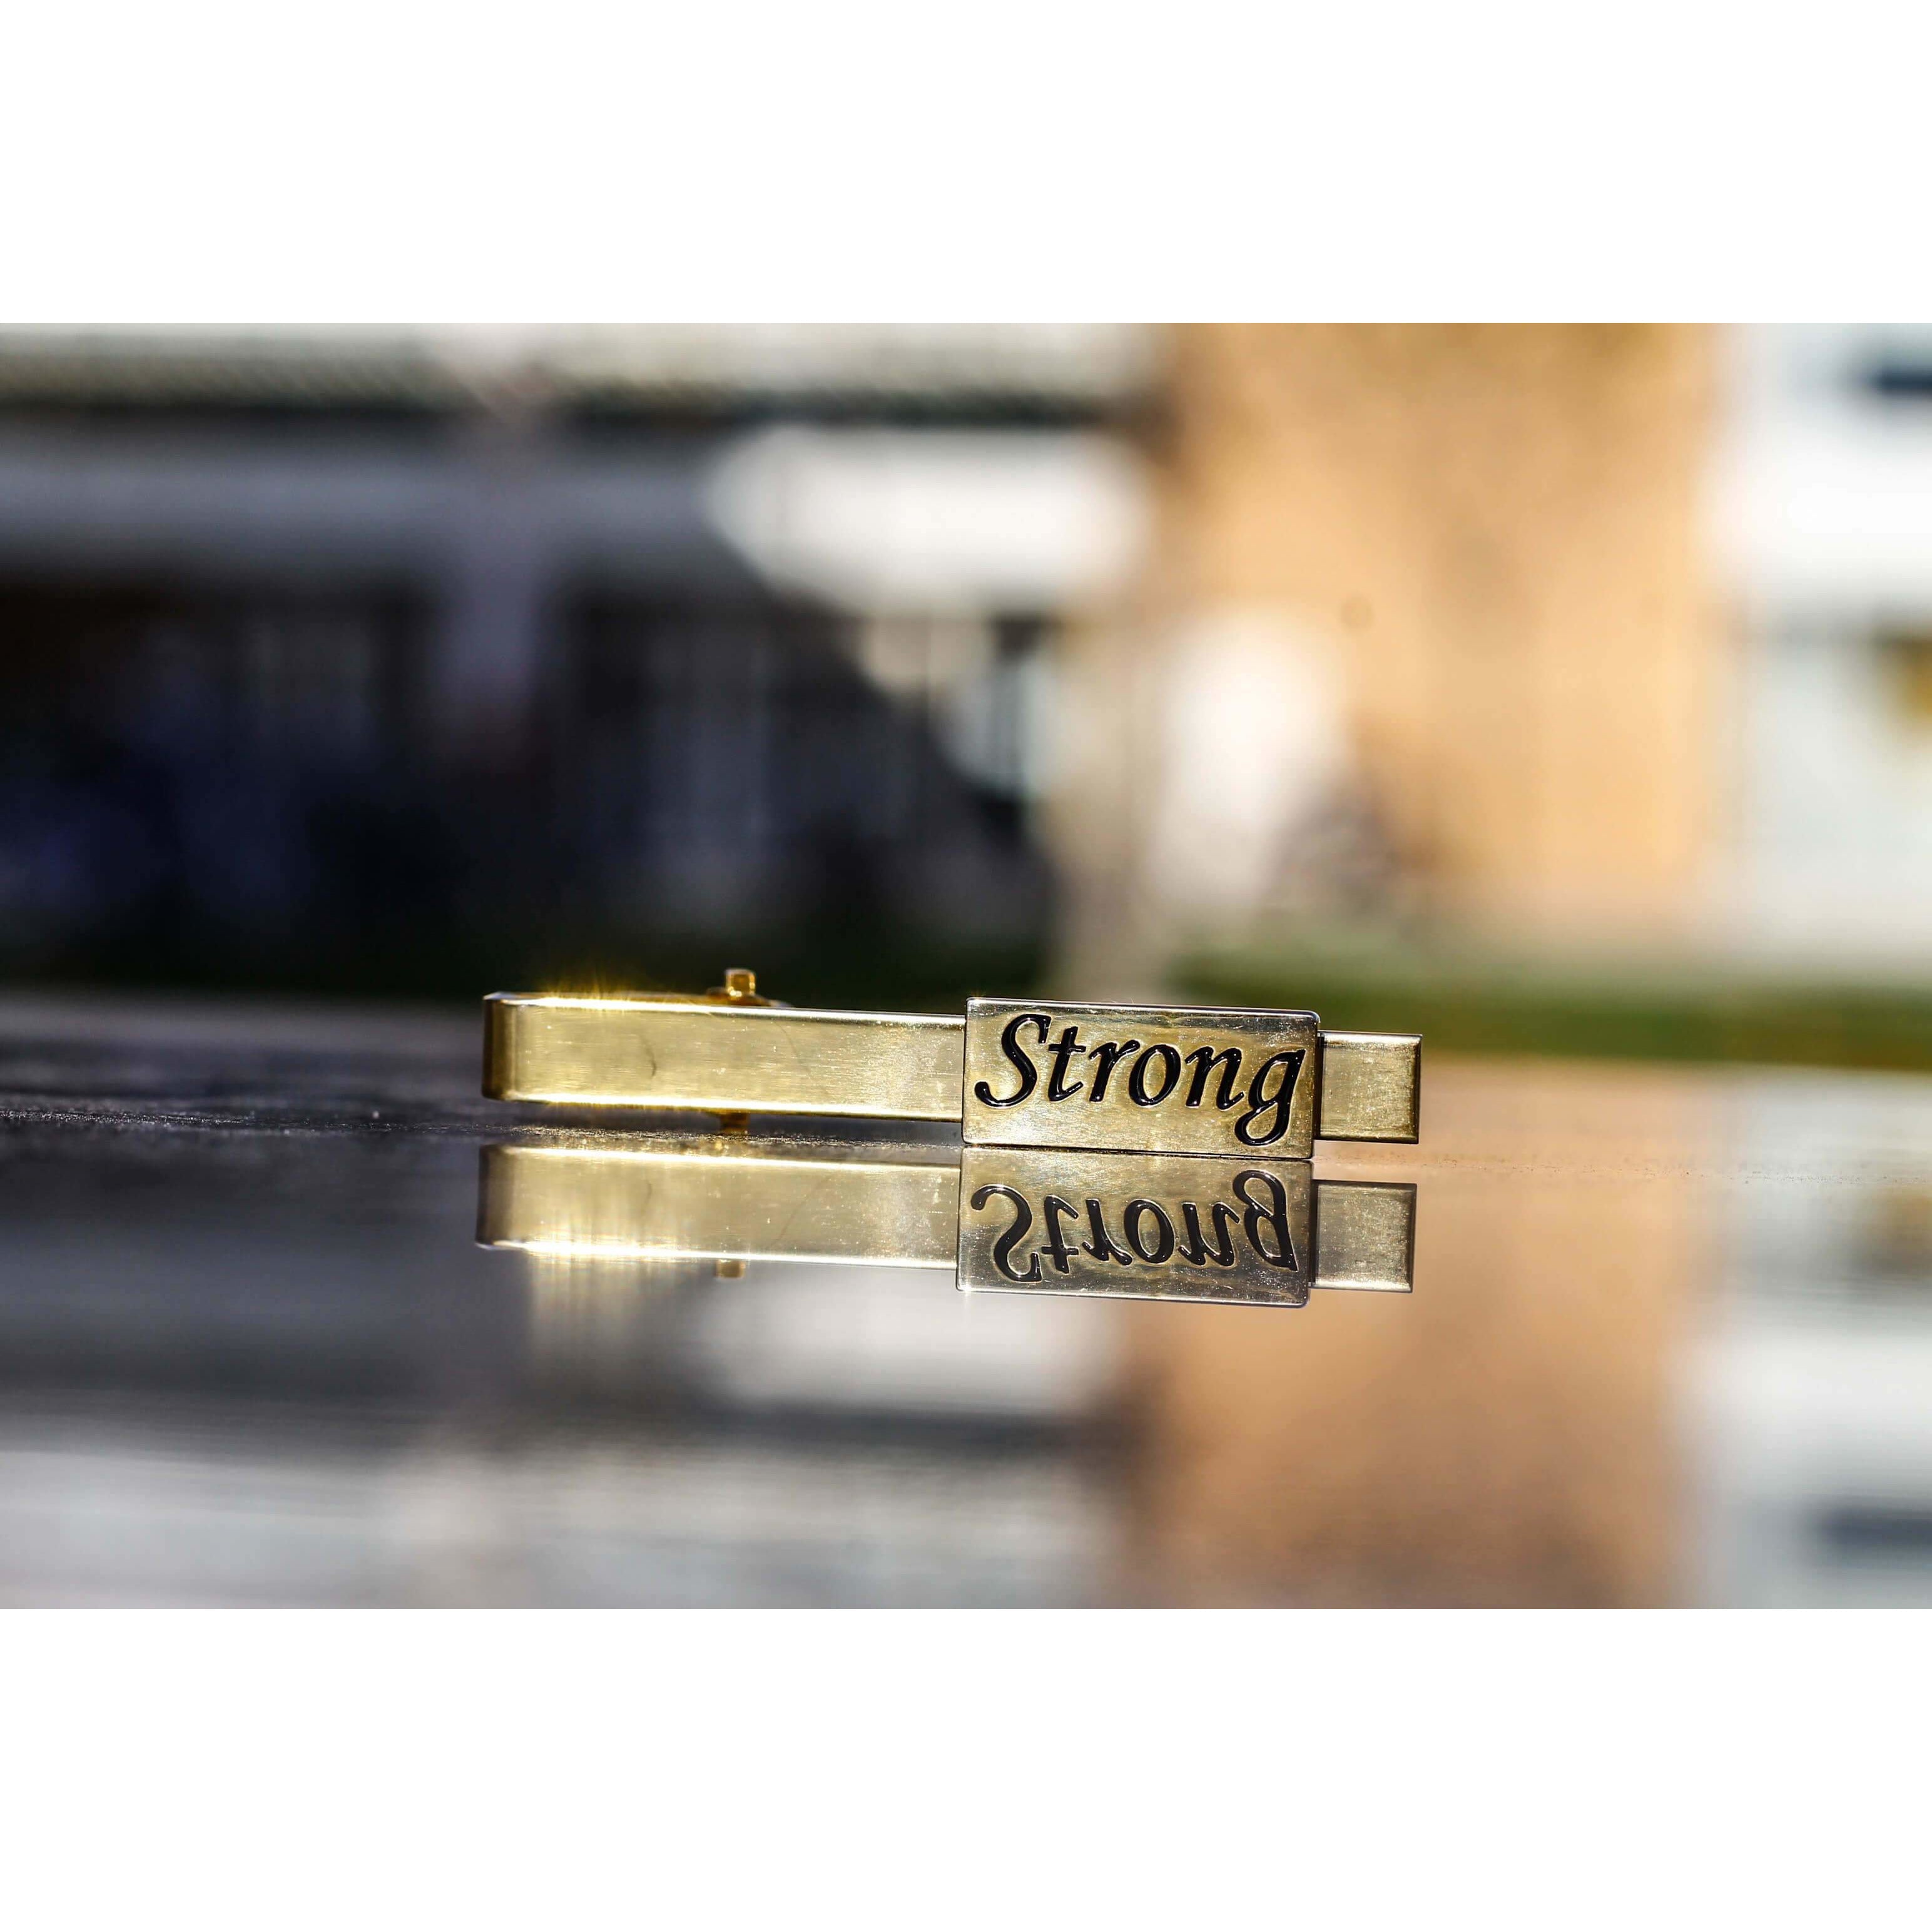 Strong Tie Clip-I am___.